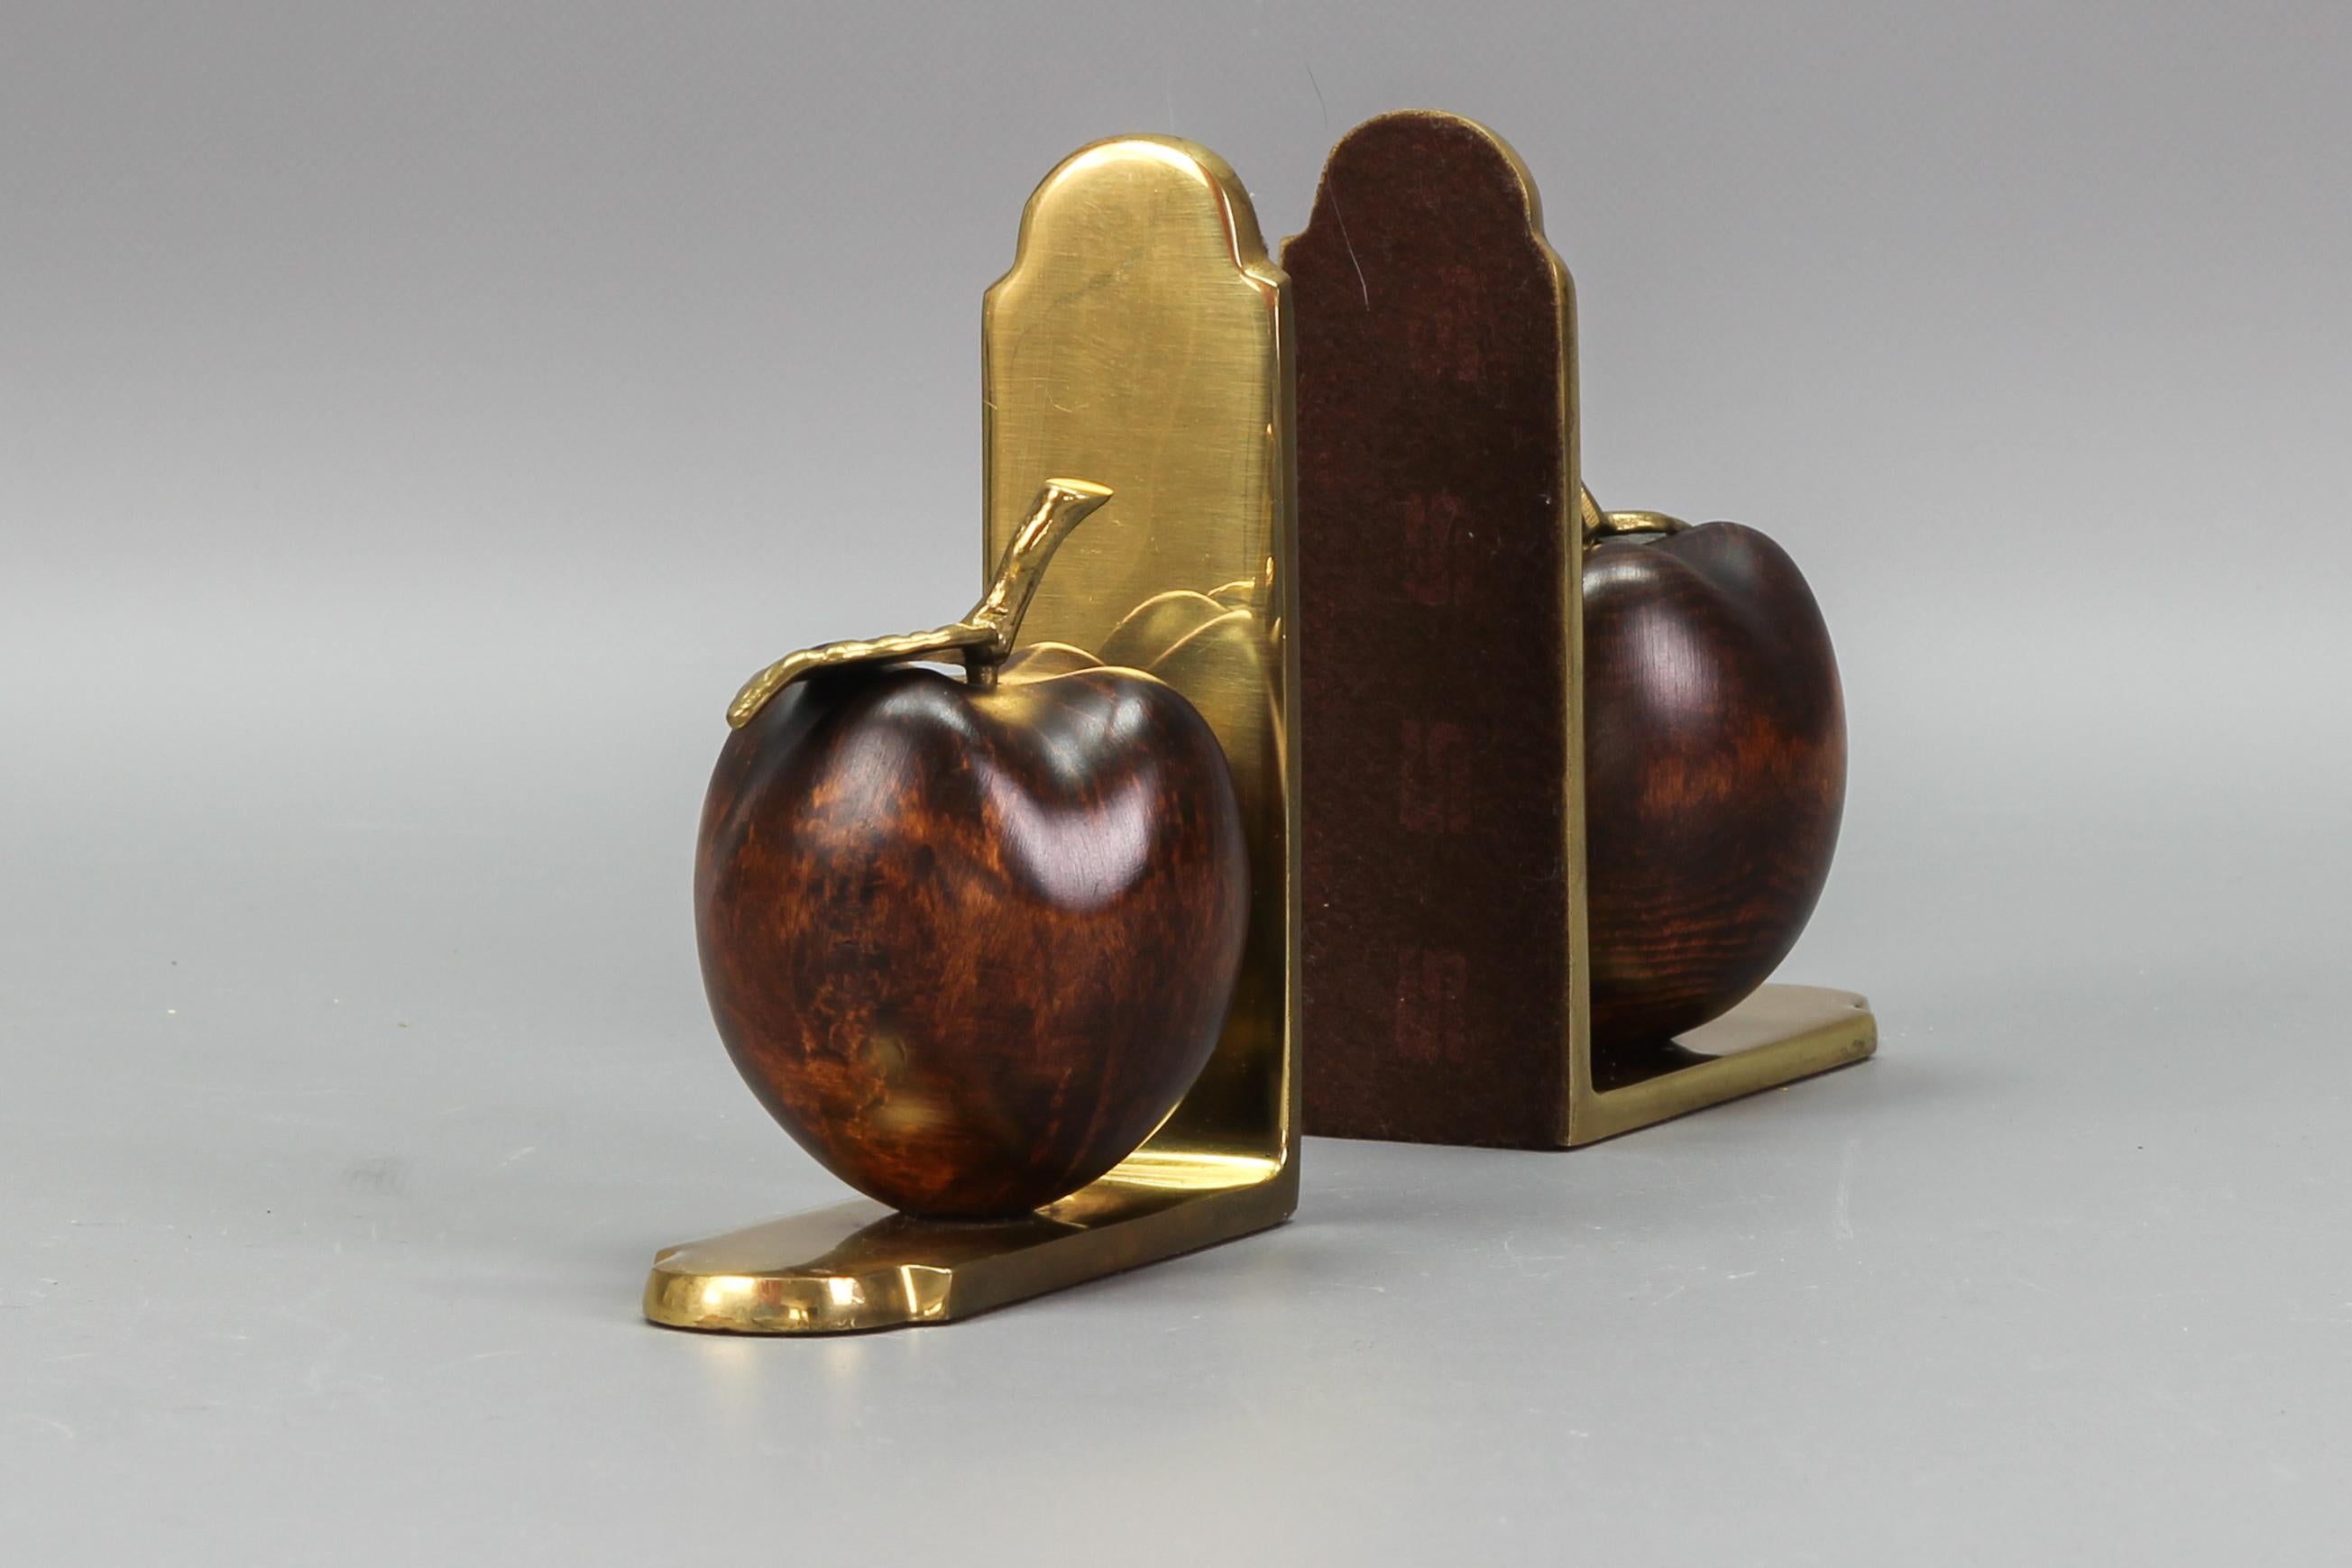 French Vintage Brass and Wooden Apples Bookends For Sale